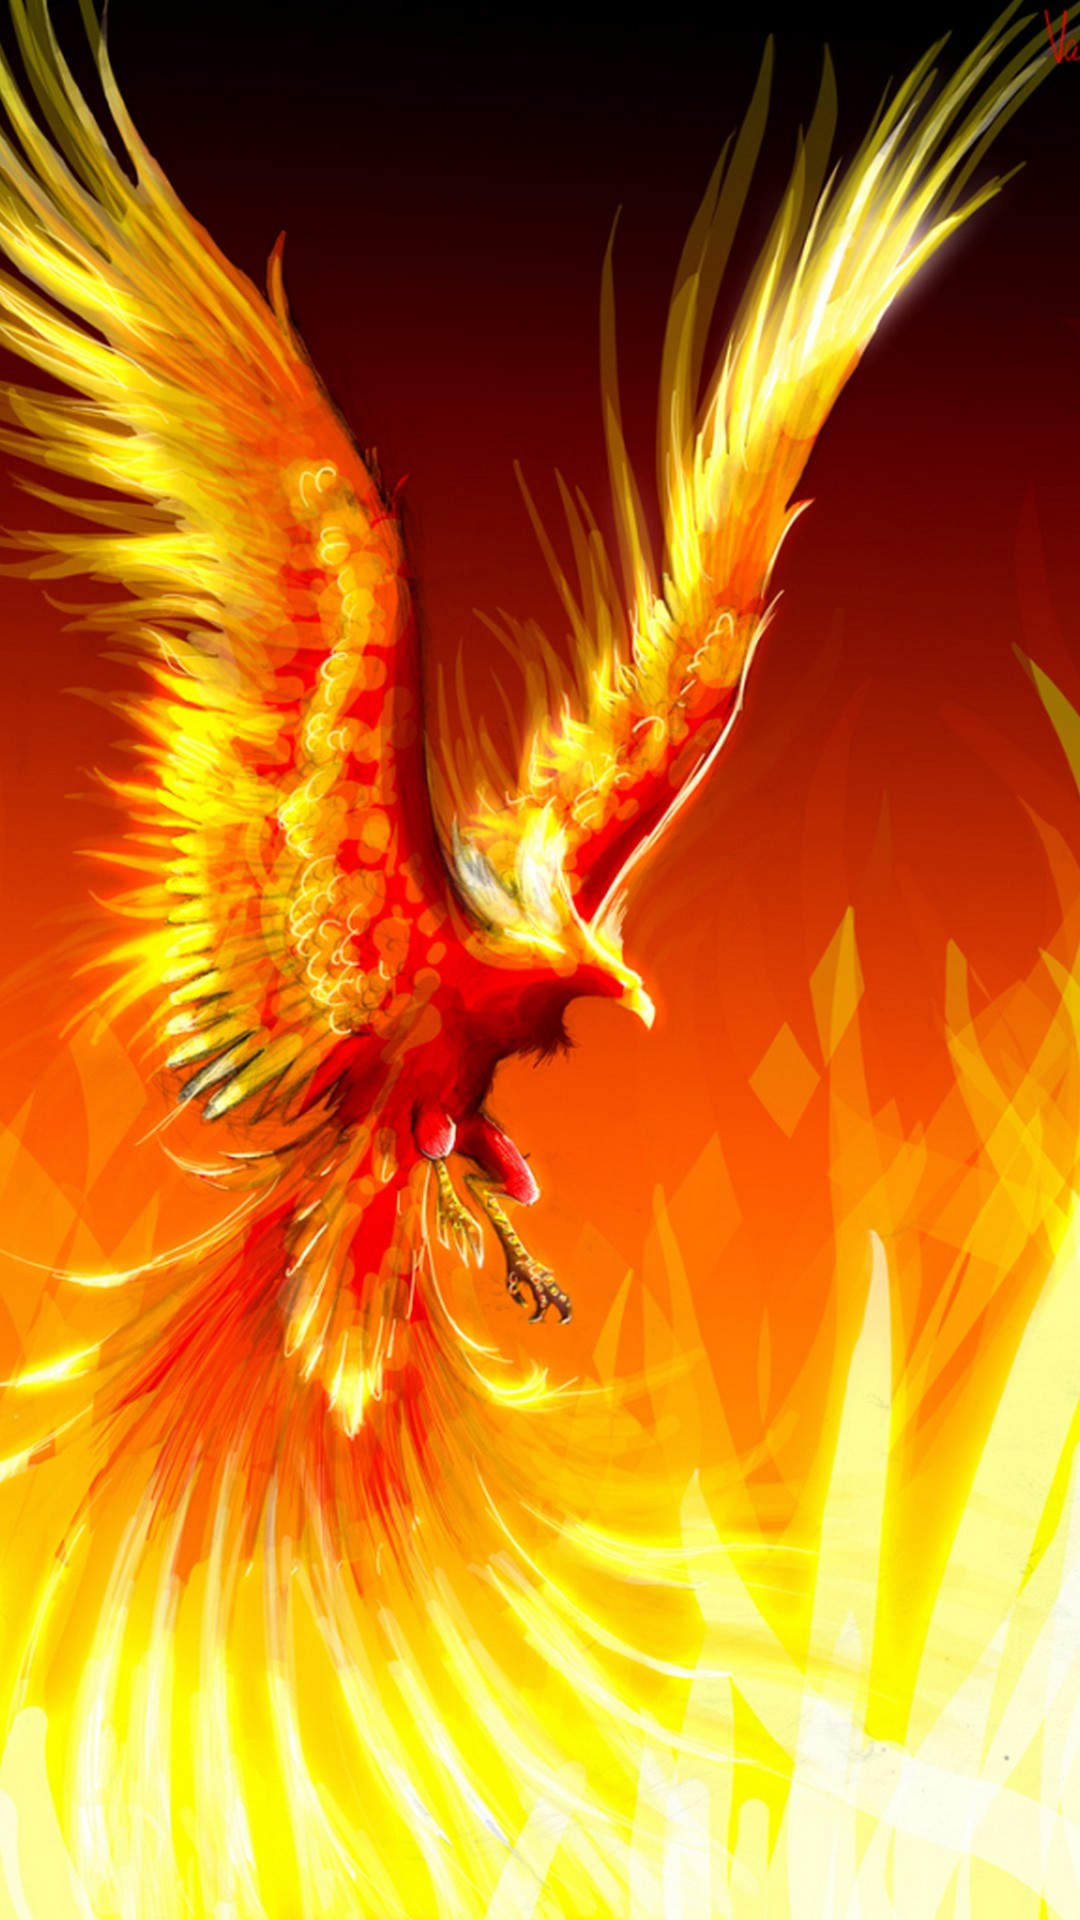 Phoenix Bird Backgrounds For Android with image resolution 1080x1920 pixel. You can make this wallpaper for your Android backgrounds, Tablet, Smartphones Screensavers and Mobile Phone Lock Screen